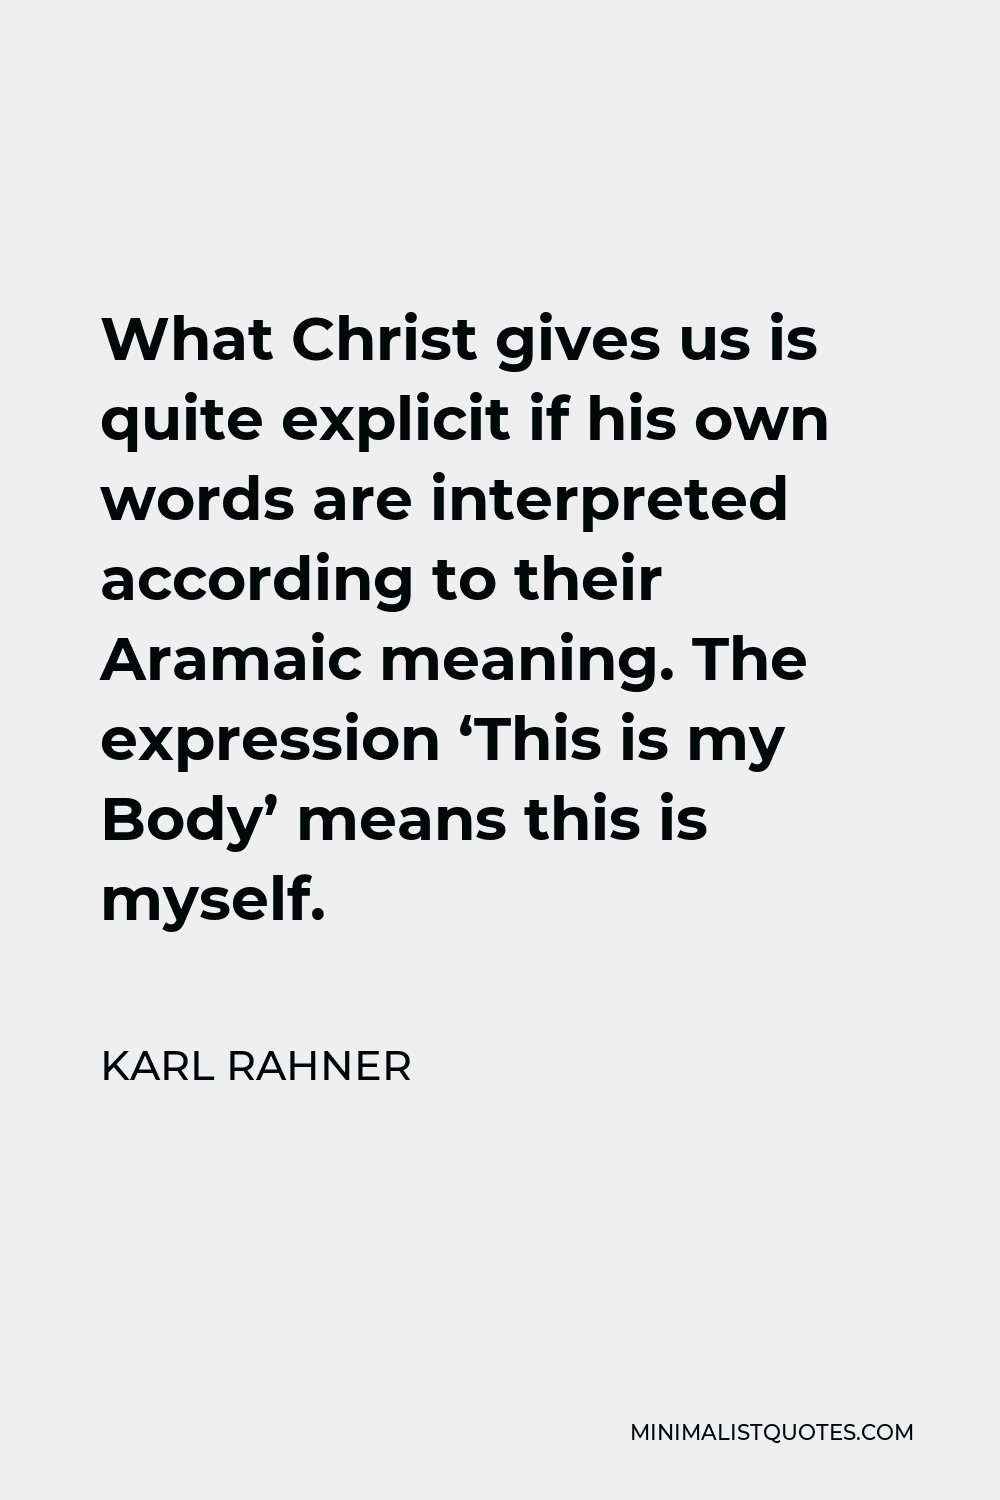 Karl Rahner Quote - What Christ gives us is quite explicit if his own words are interpreted according to their Aramaic meaning. The expression ‘This is my Body’ means this is myself.